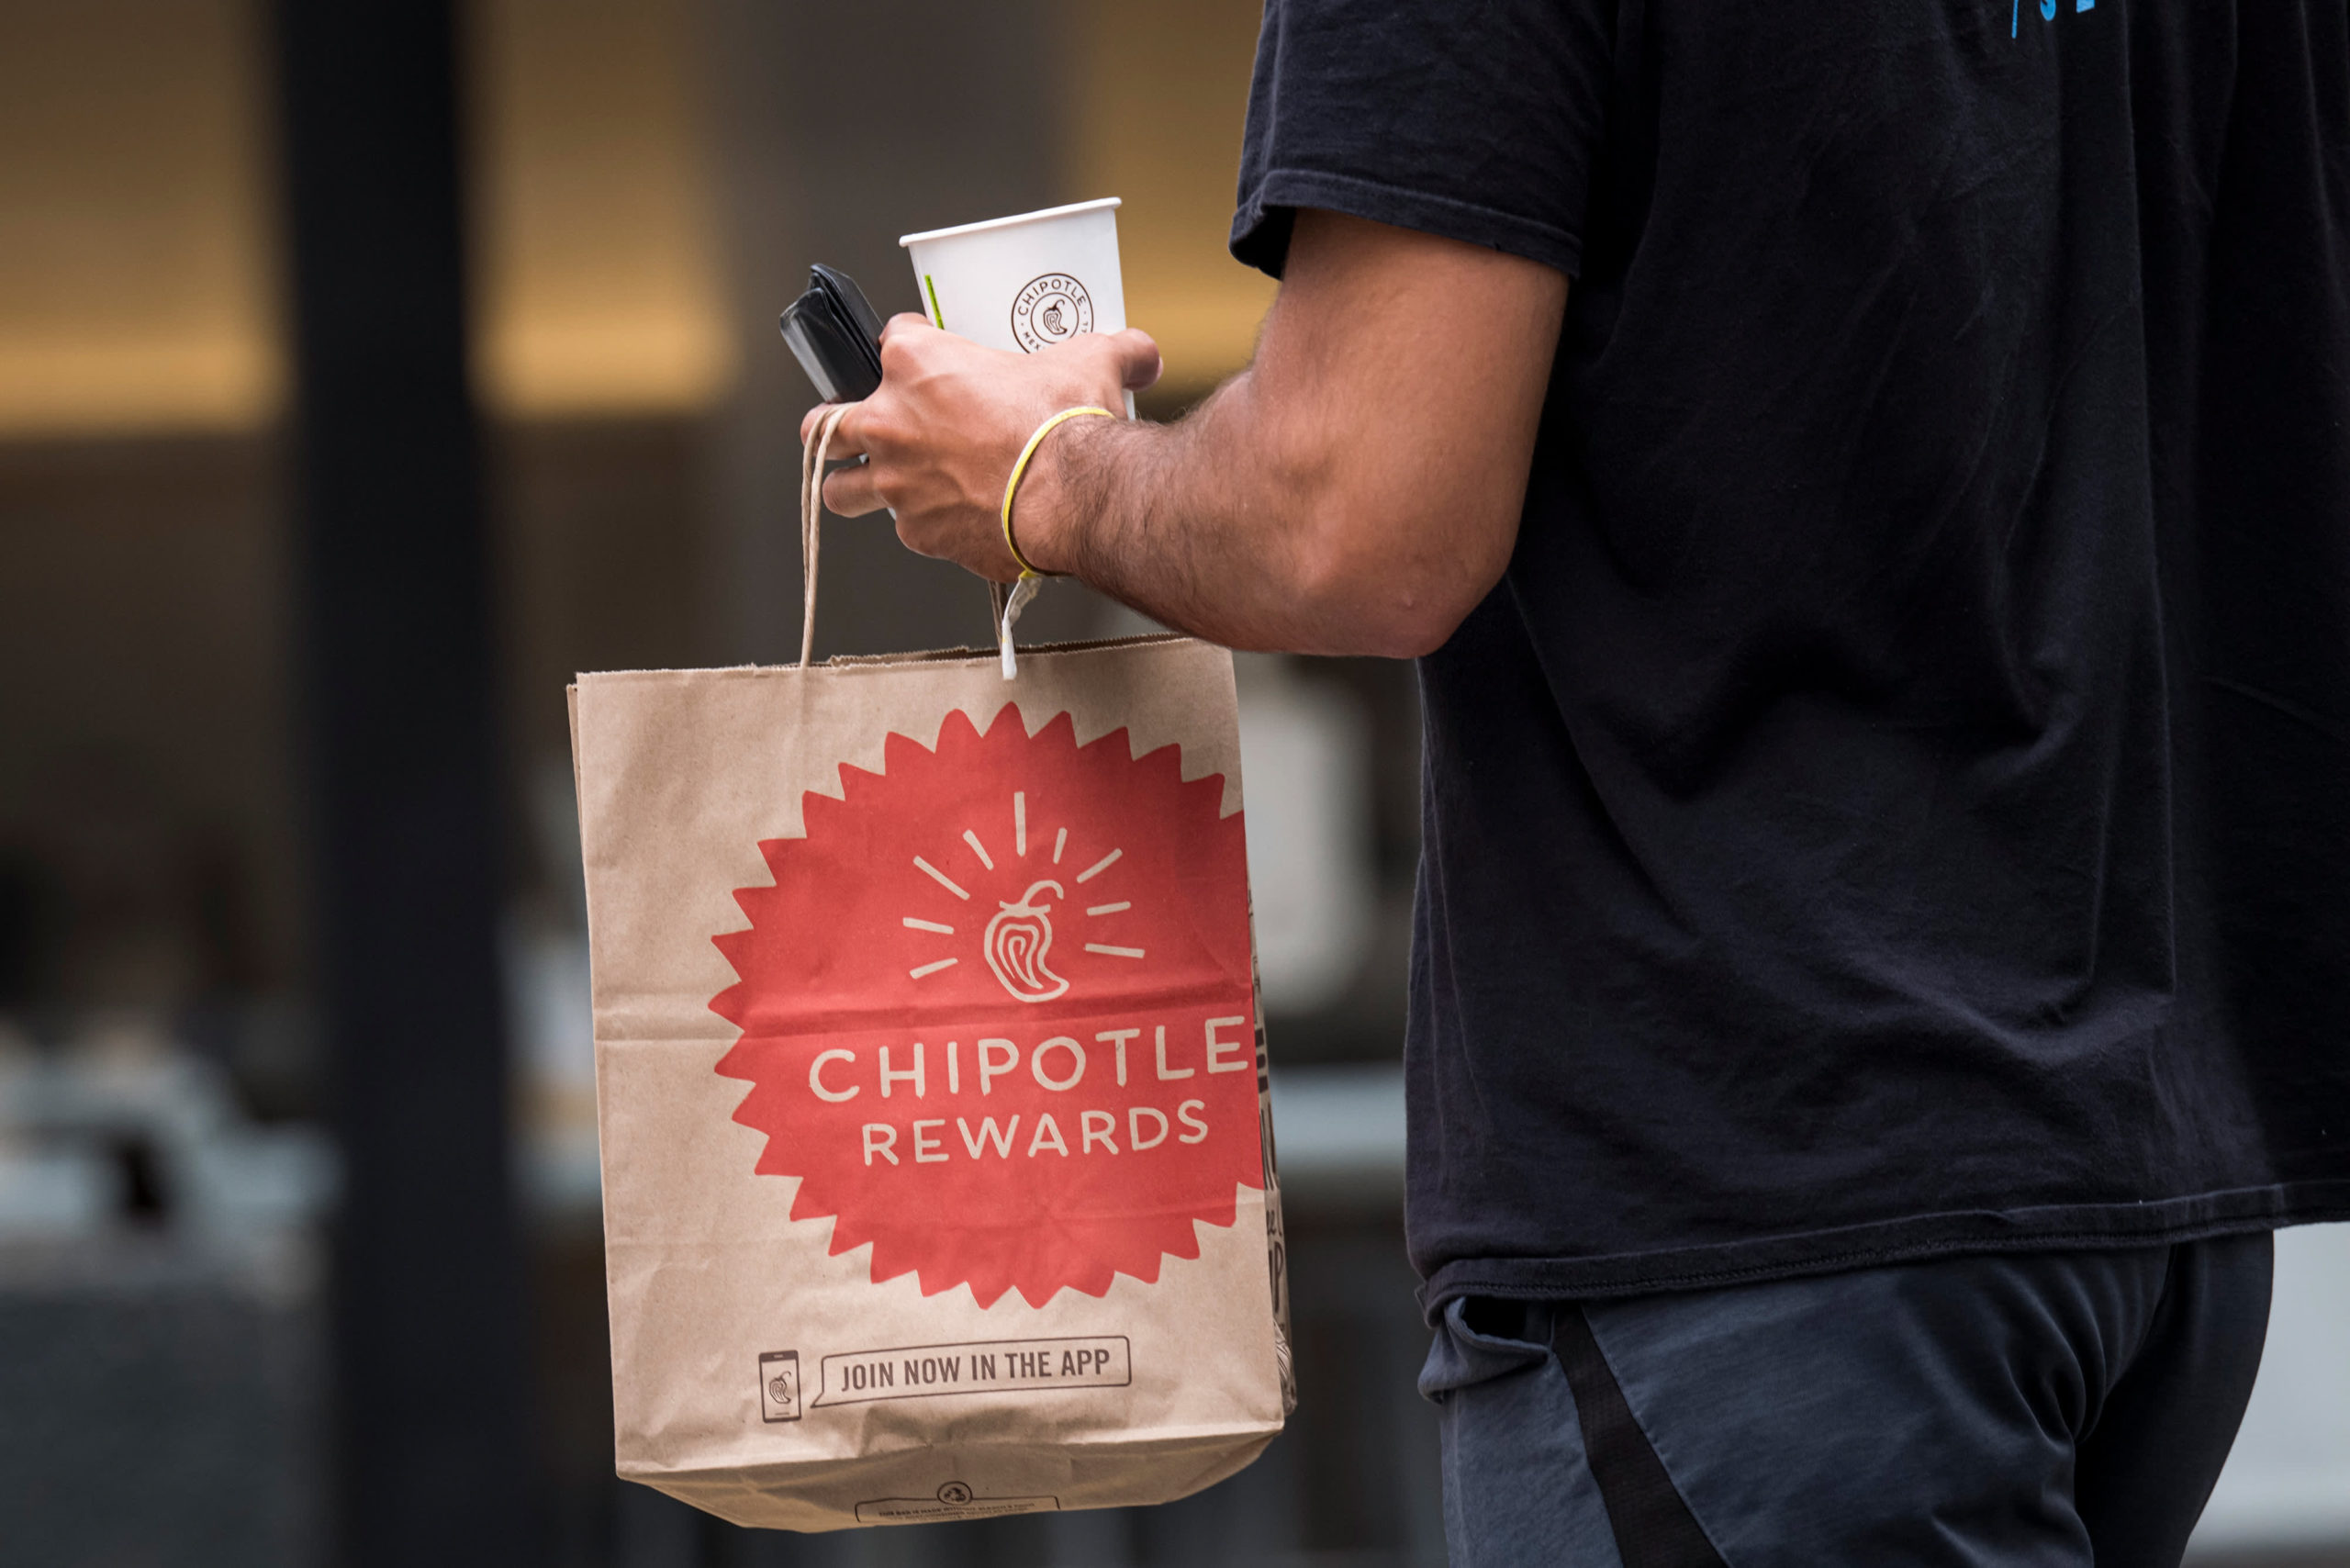 Chipotle Mexican Grill (CMG) Q3 2021 earnings